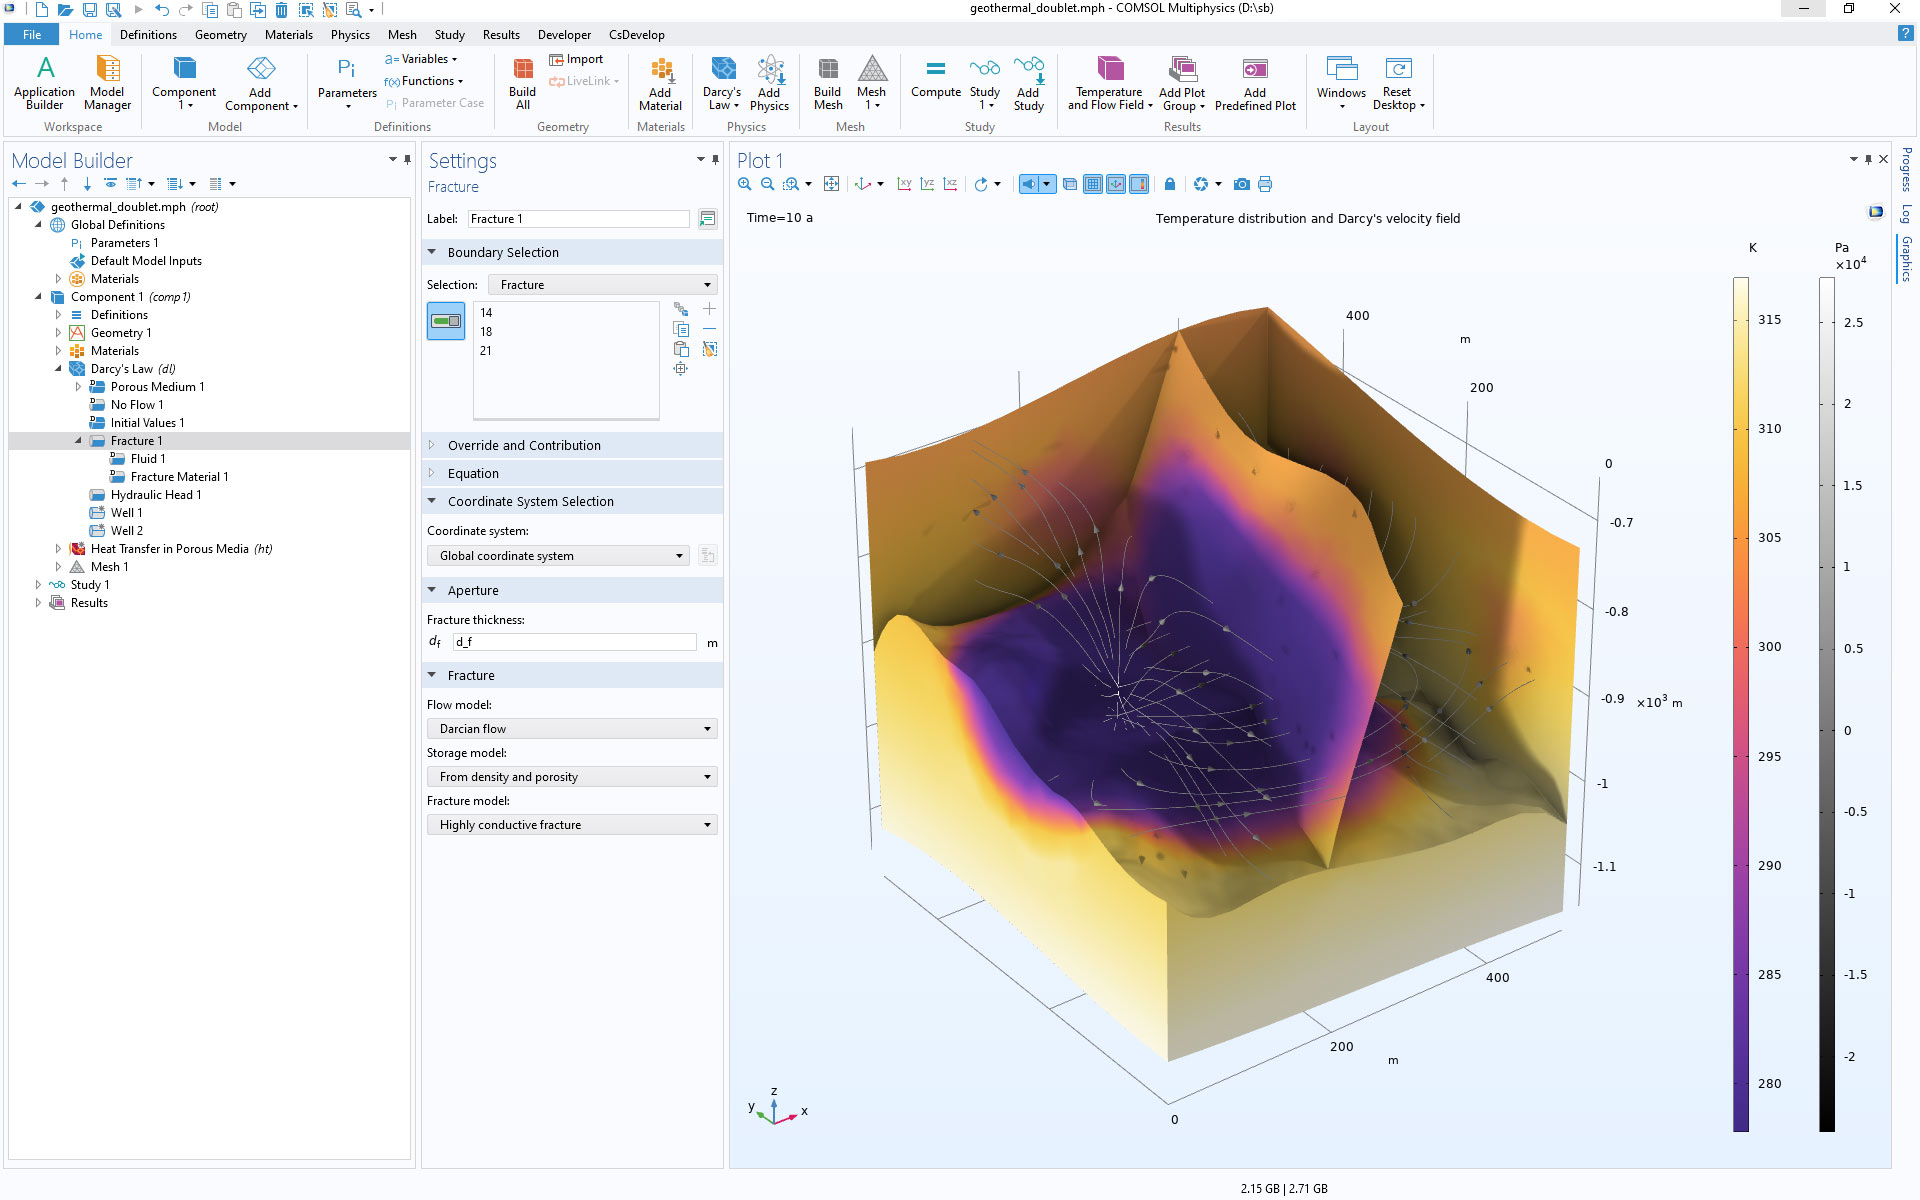 The COMSOL Multiphysics UI showing the Model Builder window with the Fracture node selected, the corresponding Settings window, and the Graphics window showing a porous medium.